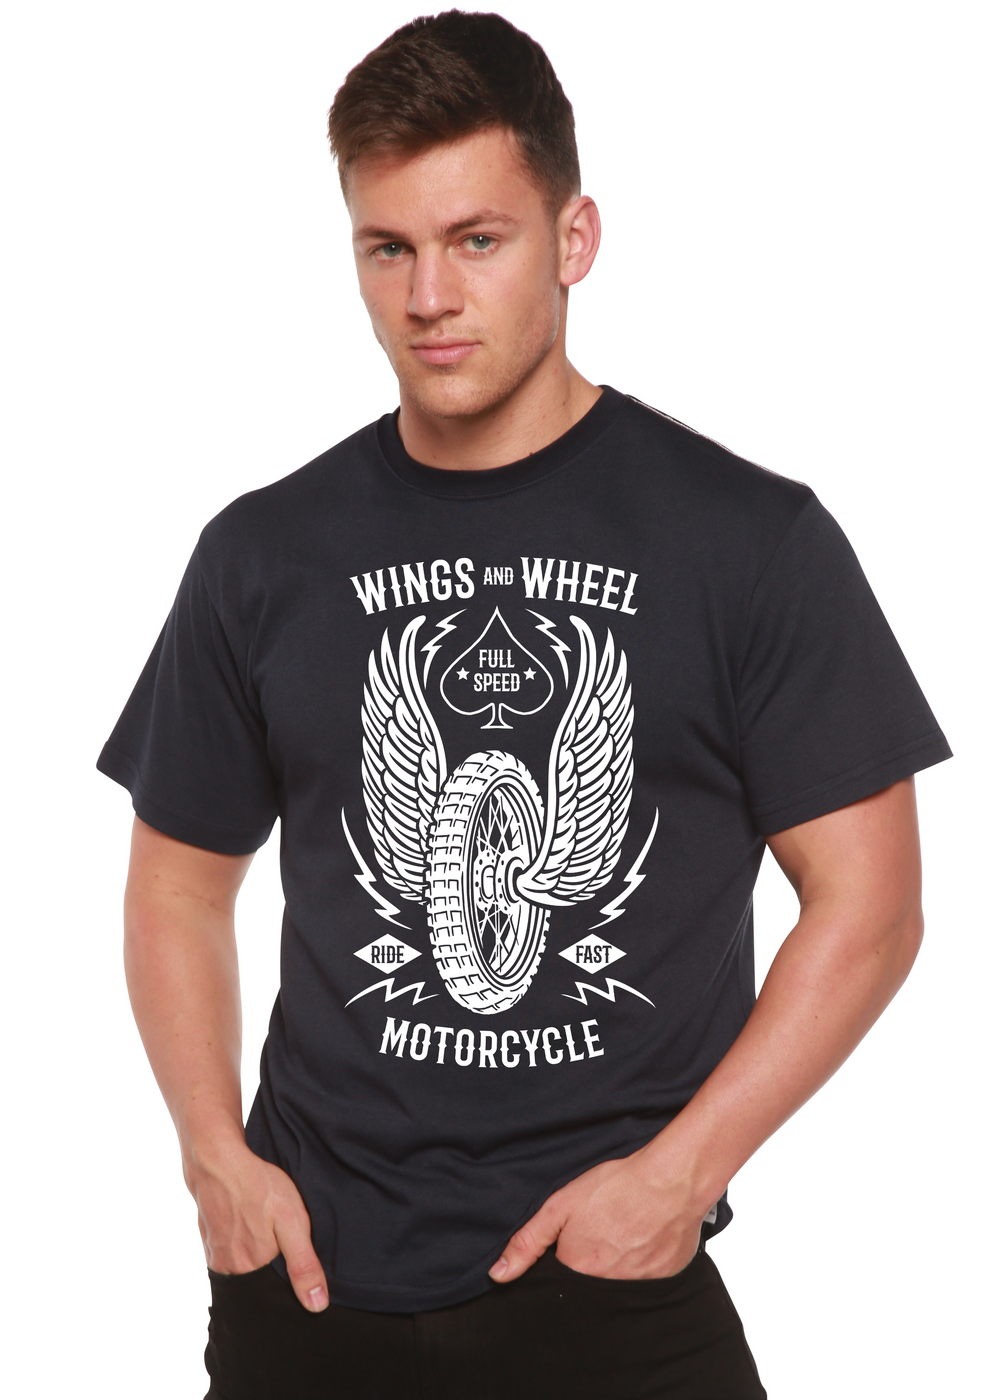 Wings And Wheel men's bamboo tshirt navy blue